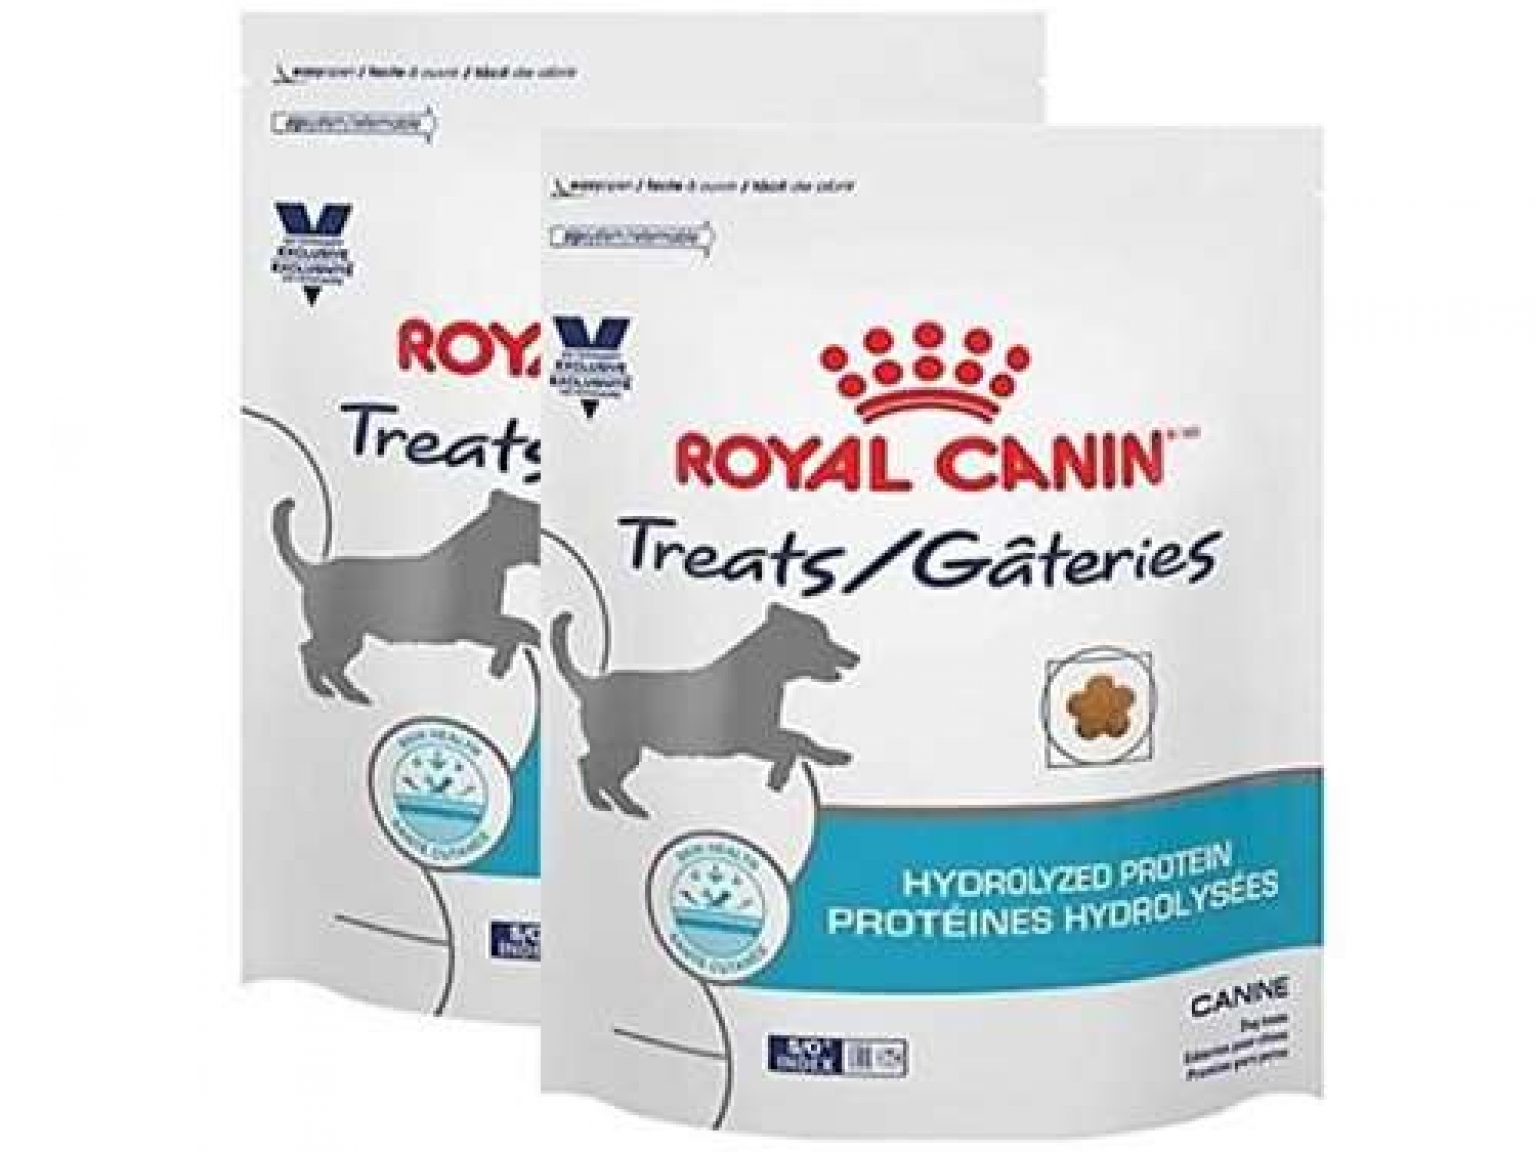 10 Best Hydrolyzed Protein Dog Foods and Treats Reviews